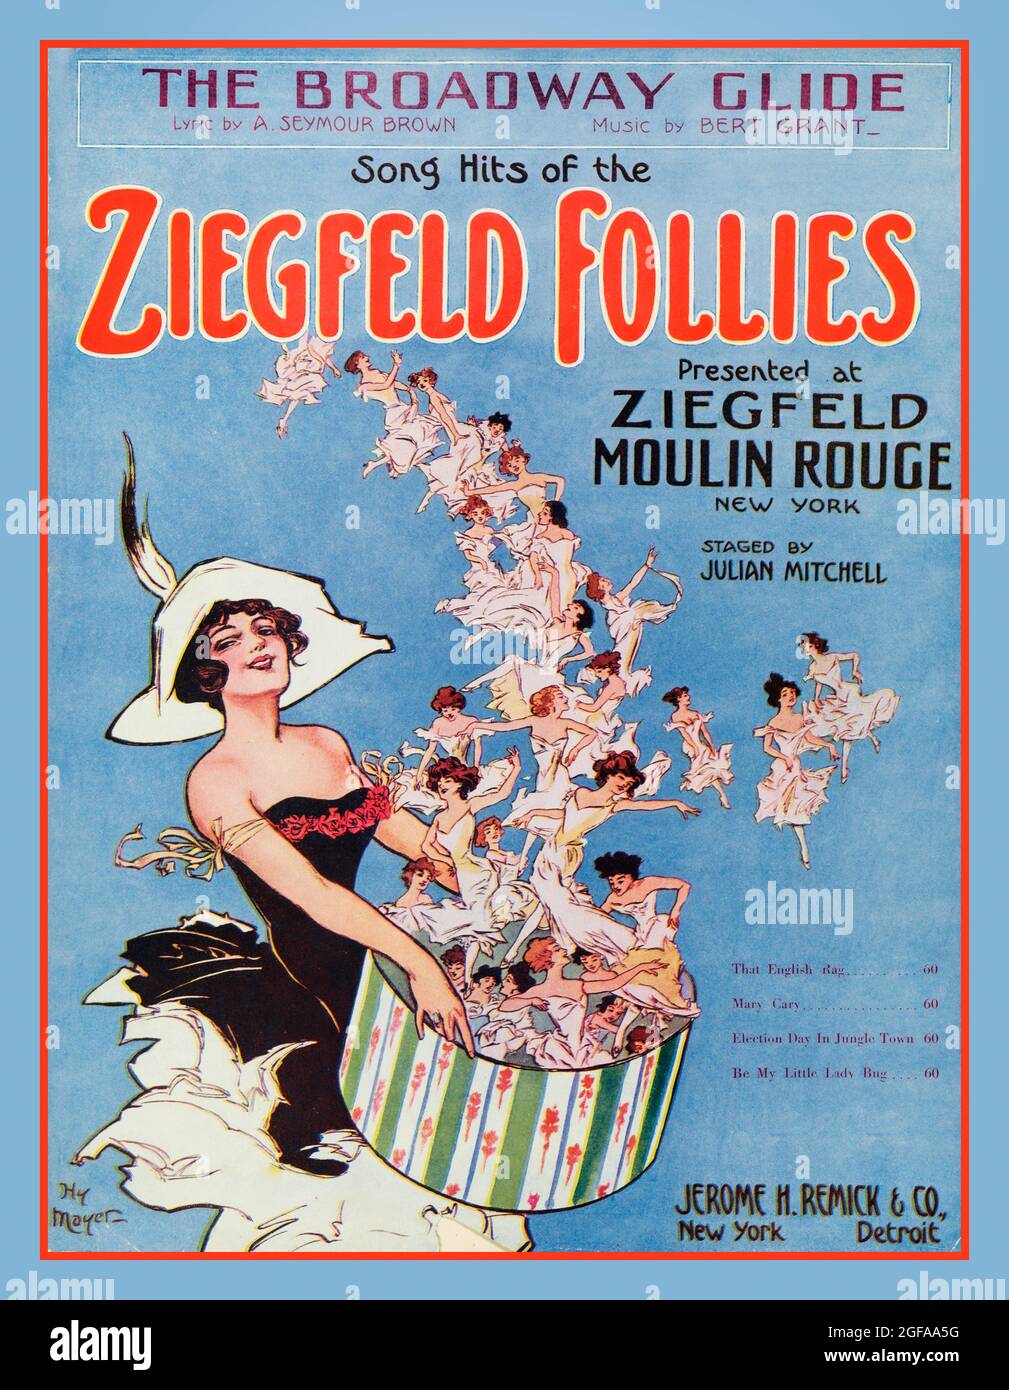 'Ziegfeld Follies of 1912' Musical Sheet Music Cover -'THE BROADWAY GLIDE' at Ziegfeld Moulin Rouge New York  That Broadway glide Contributor Names Grant, Bert -- 1878-1951 (composer) Brown, A. Seymour -- 1885-1947 (lyricist) Created / Published Jerome H. Remick & Co., New York, NY, 1912. Popular Songs of the Day Songs and Music Progressive Era to New Era (1900-1929) sheet music Stock Photo